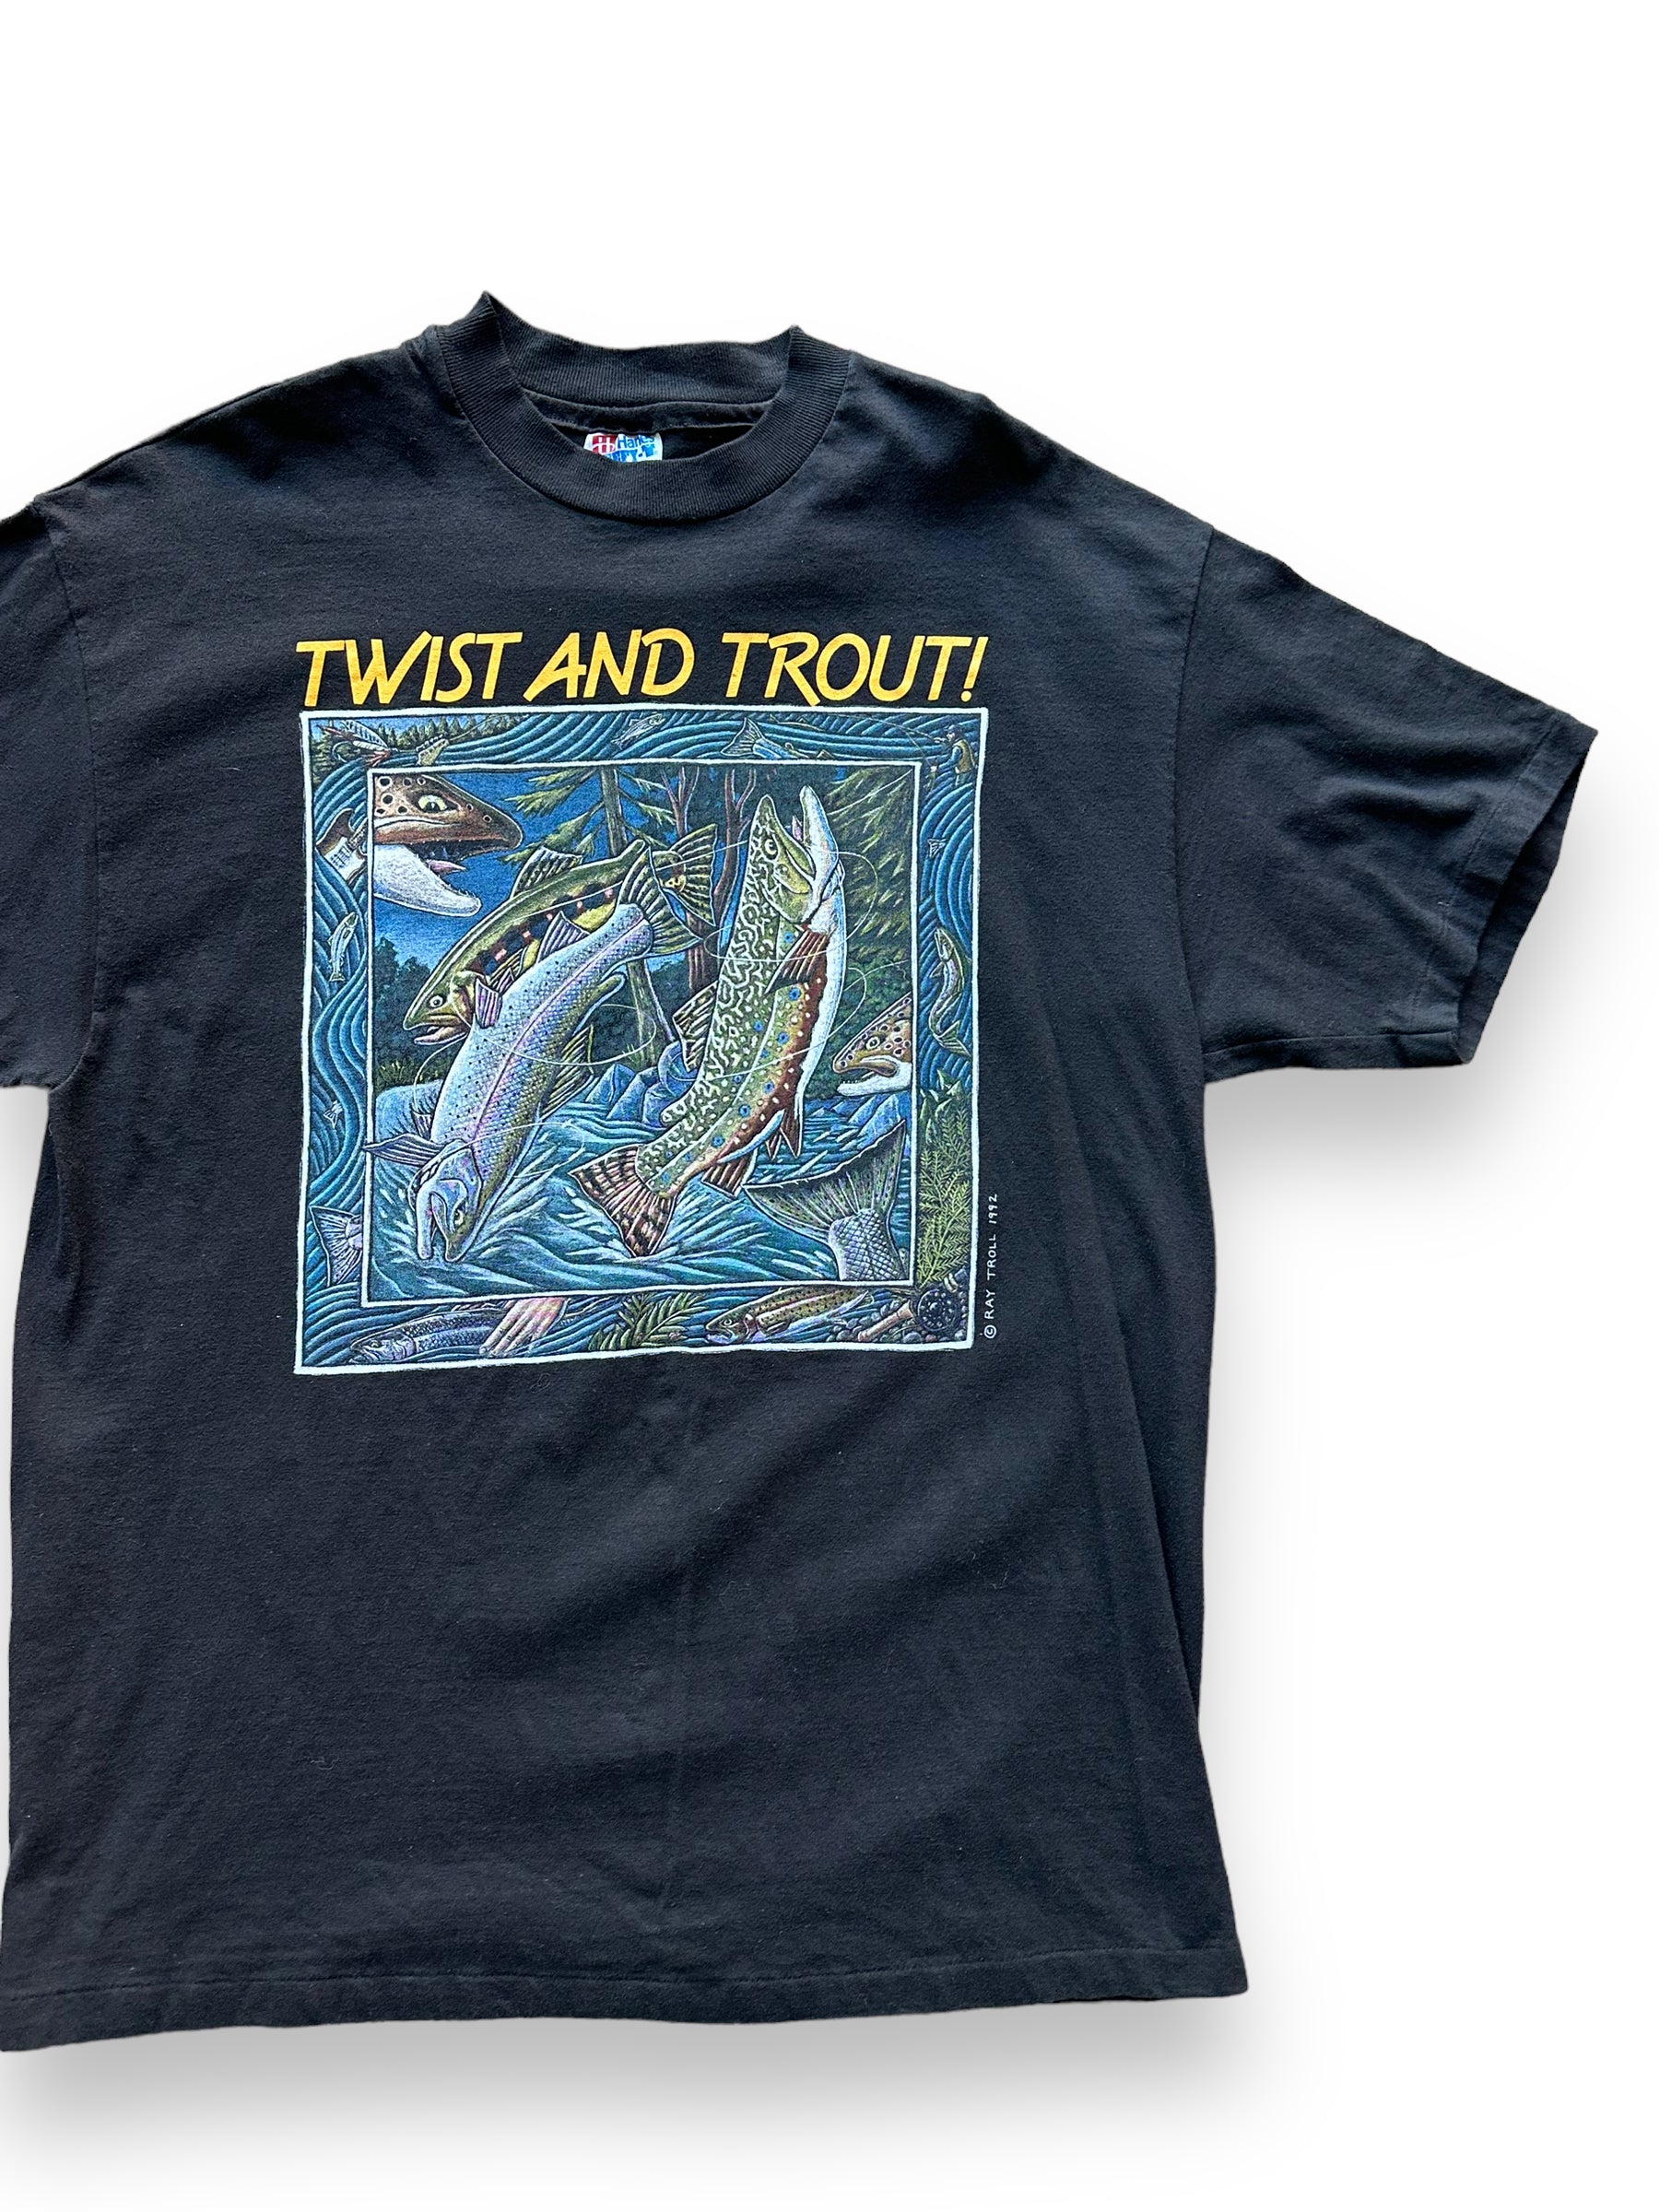 Front left of Vintage Ray Troll Twist and Trout Tee SZ L |  Vintage Fishing Tee Seattle | Barn Owl Vintage